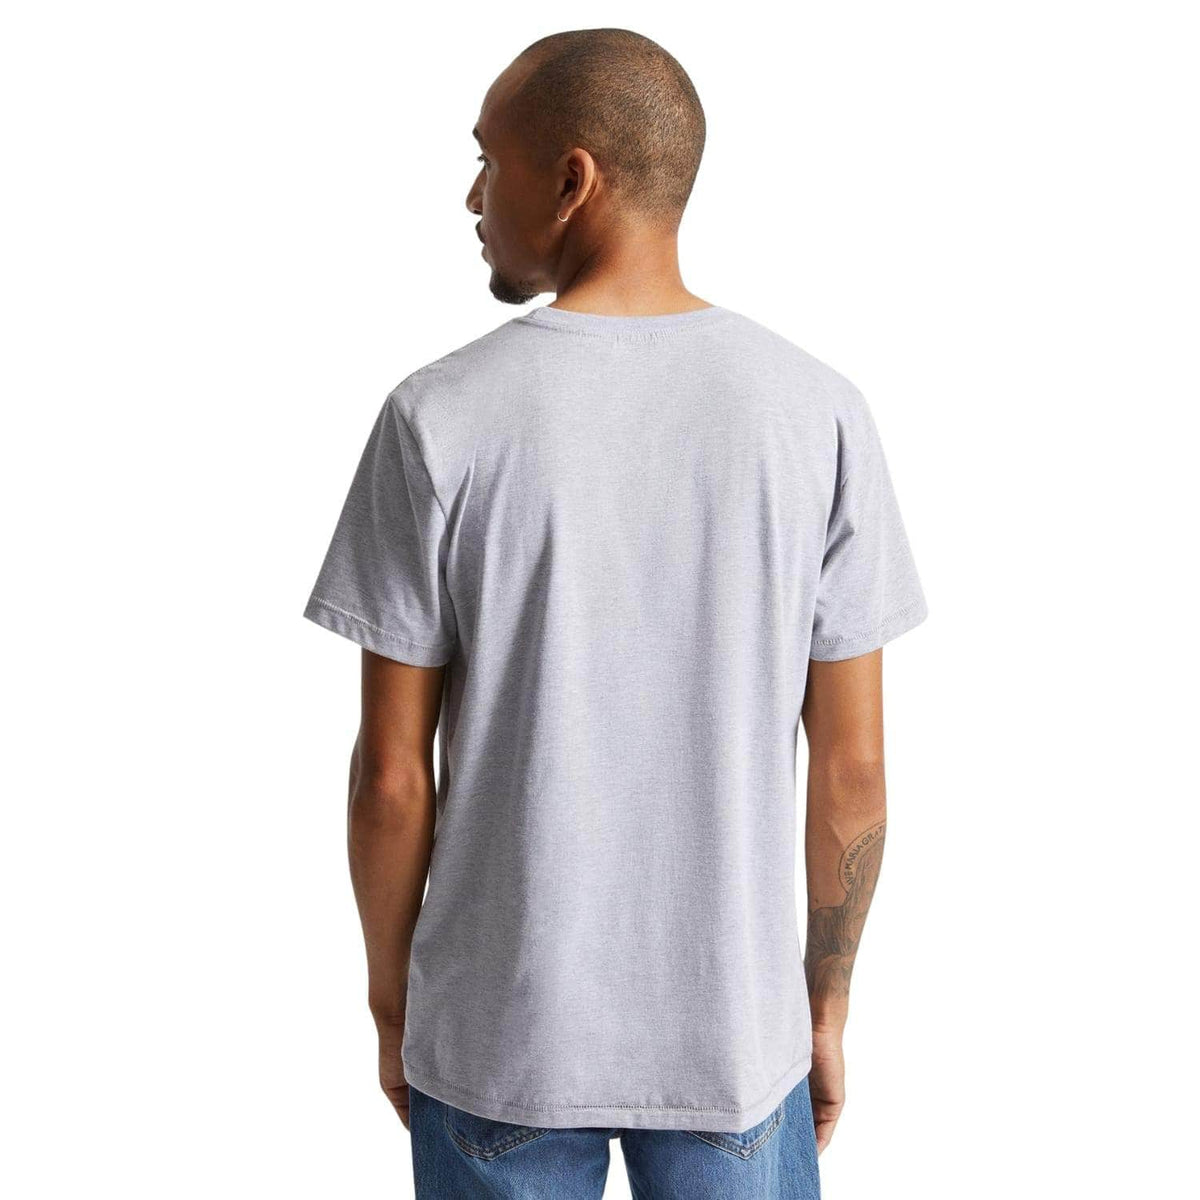 Brixton Basic Tailored T-Shirt - Heather Grey - Mens Graphic T-Shirt by Brixton